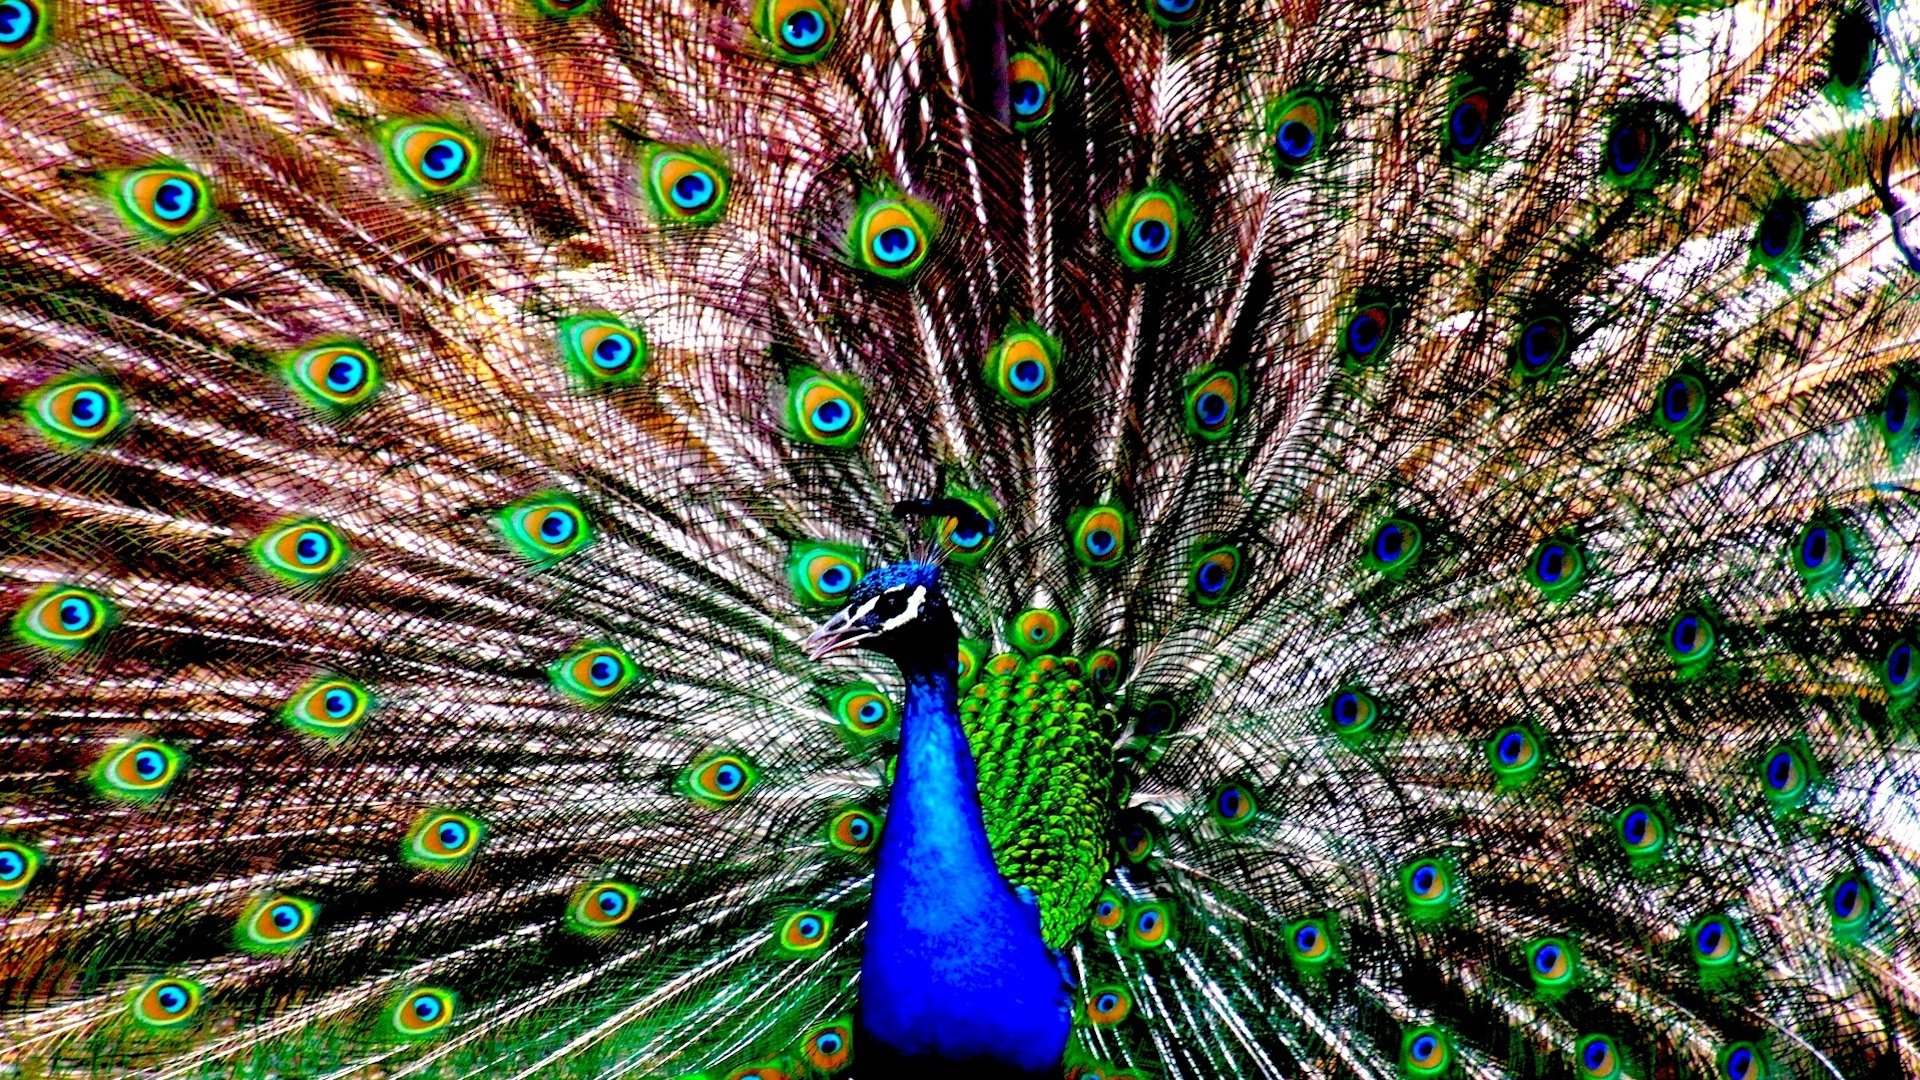 Peacock HD Wallpaper | Background Image | 1920x1080 | ID ...